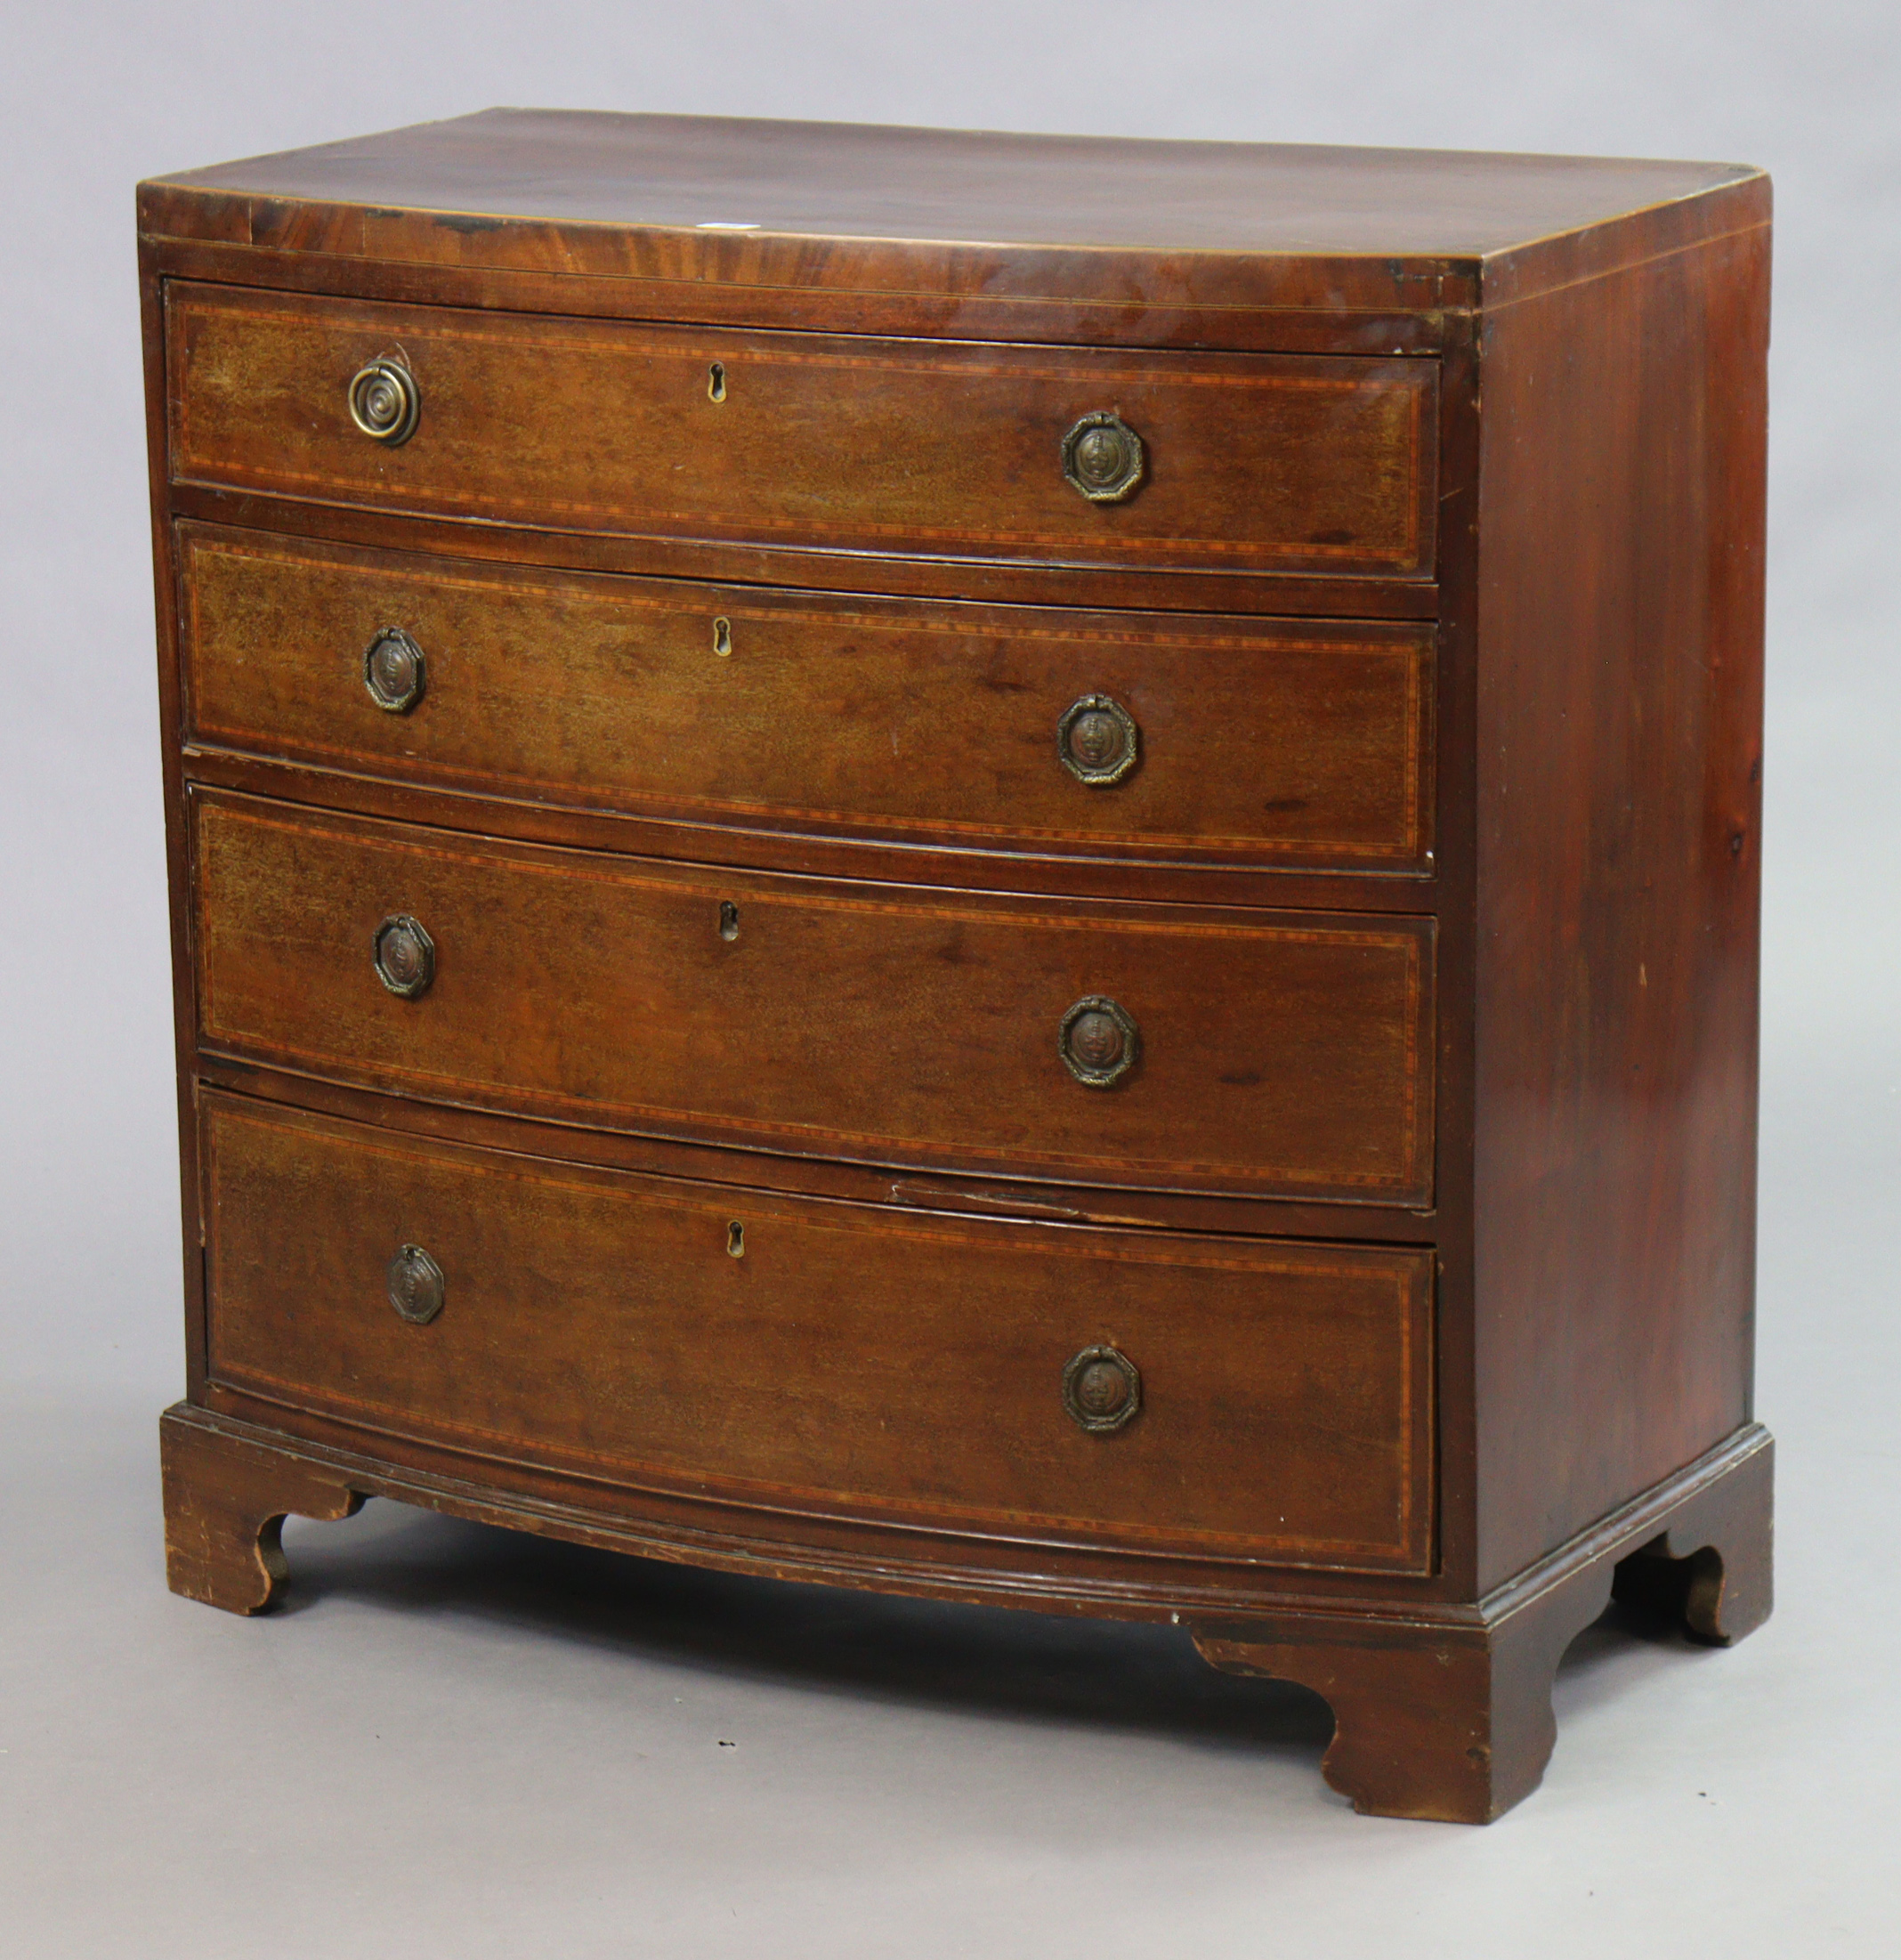 An early 19th century inlaid-mahogany small bow-front chest fitted four long graduated drawers